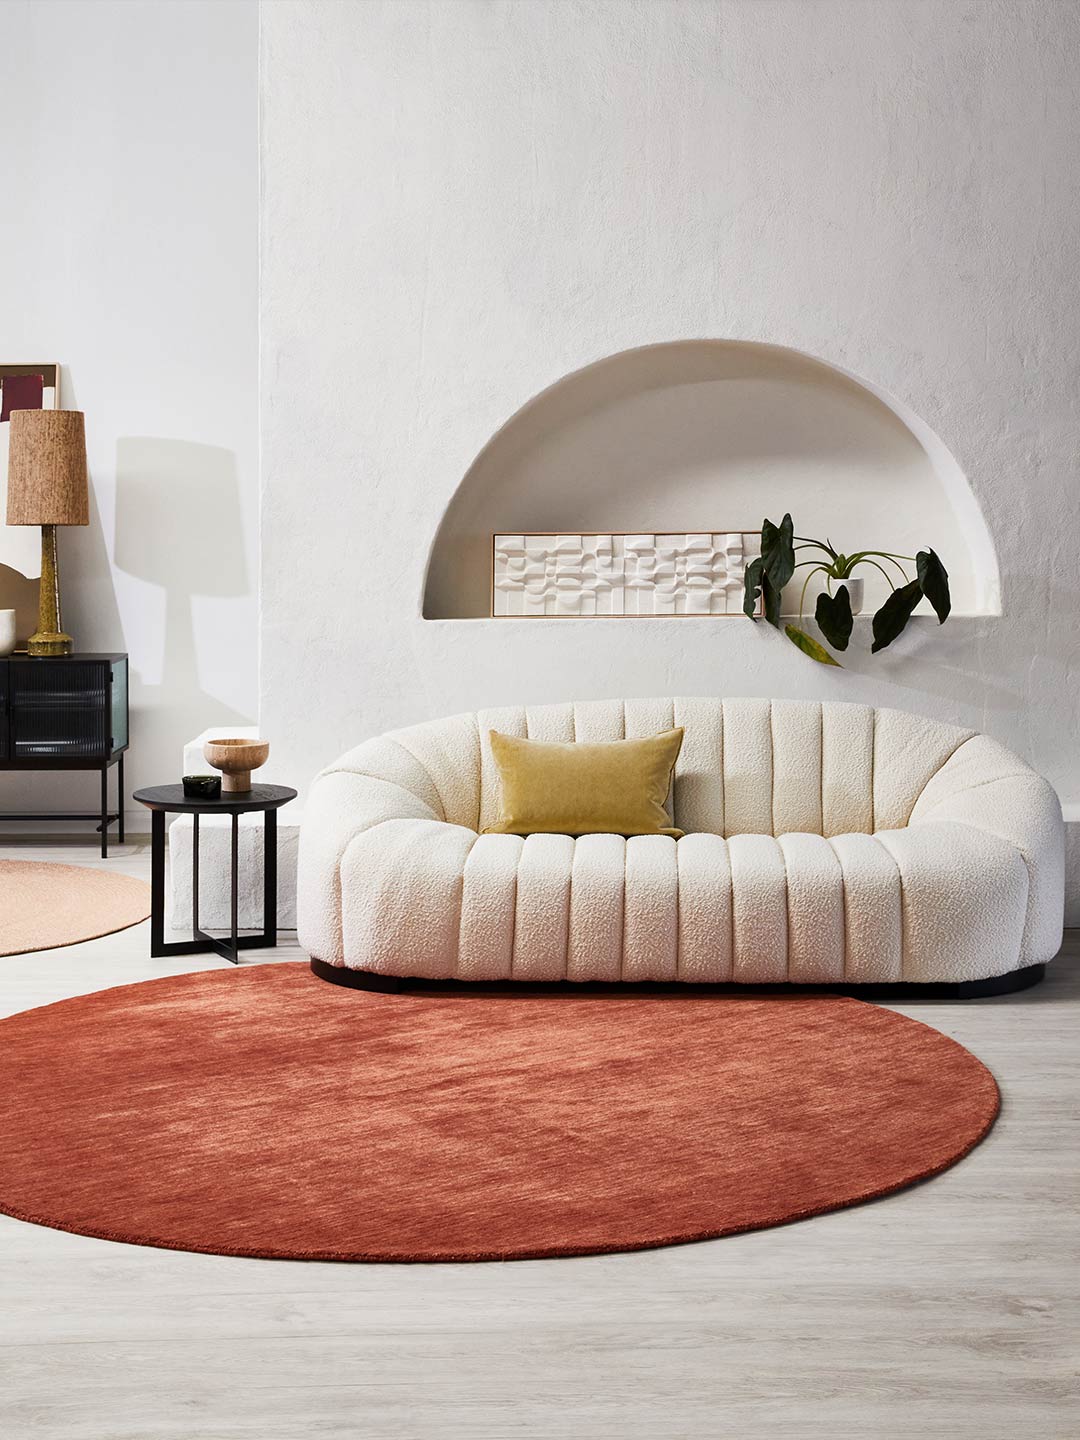 Tallira Furniture at The Rug Collection